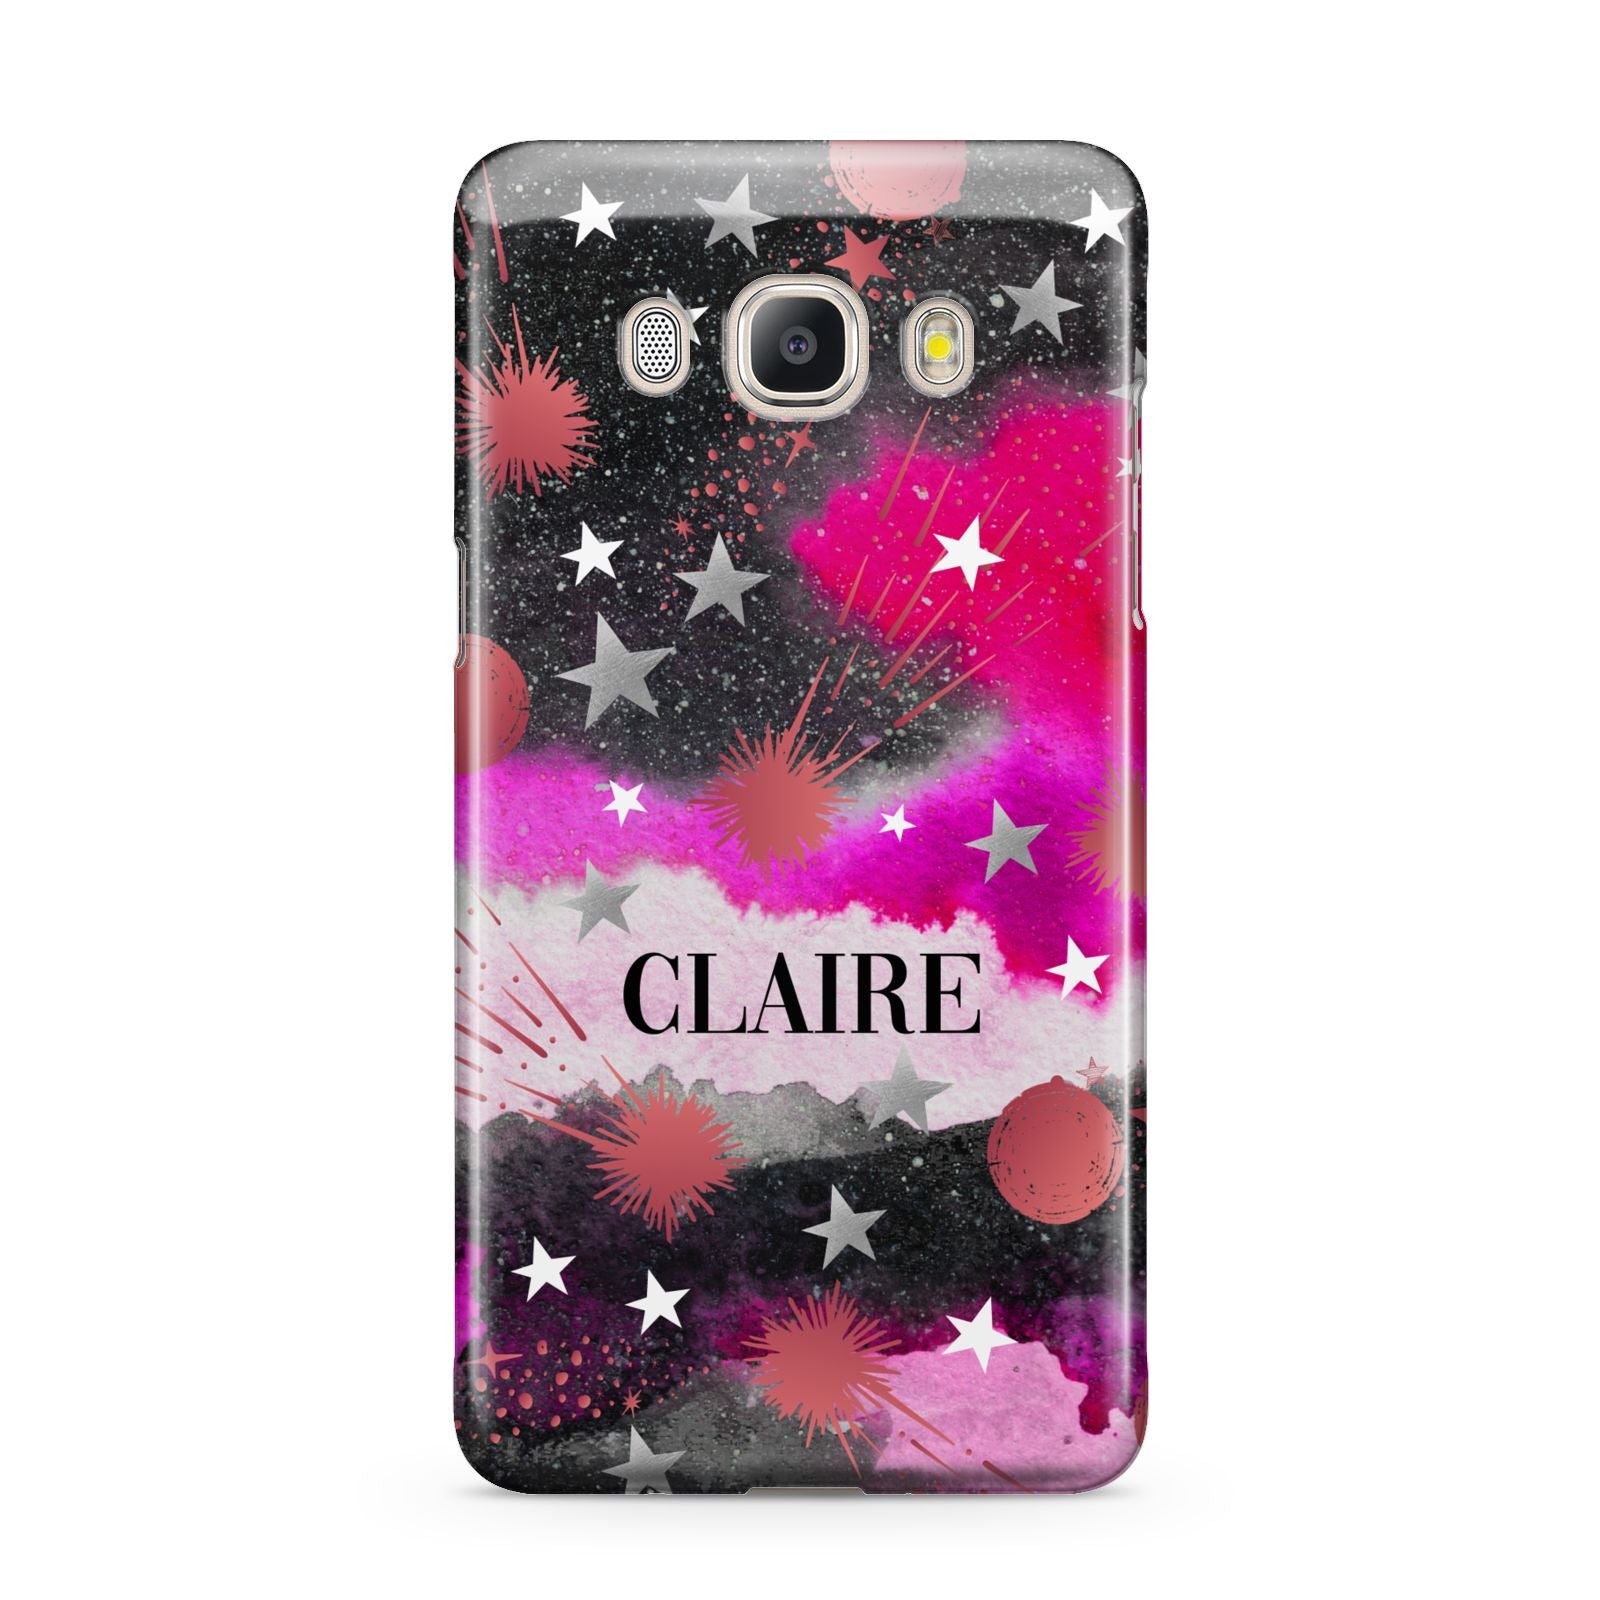 Personalised Pink Celestial Samsung Galaxy J5 2016 Case